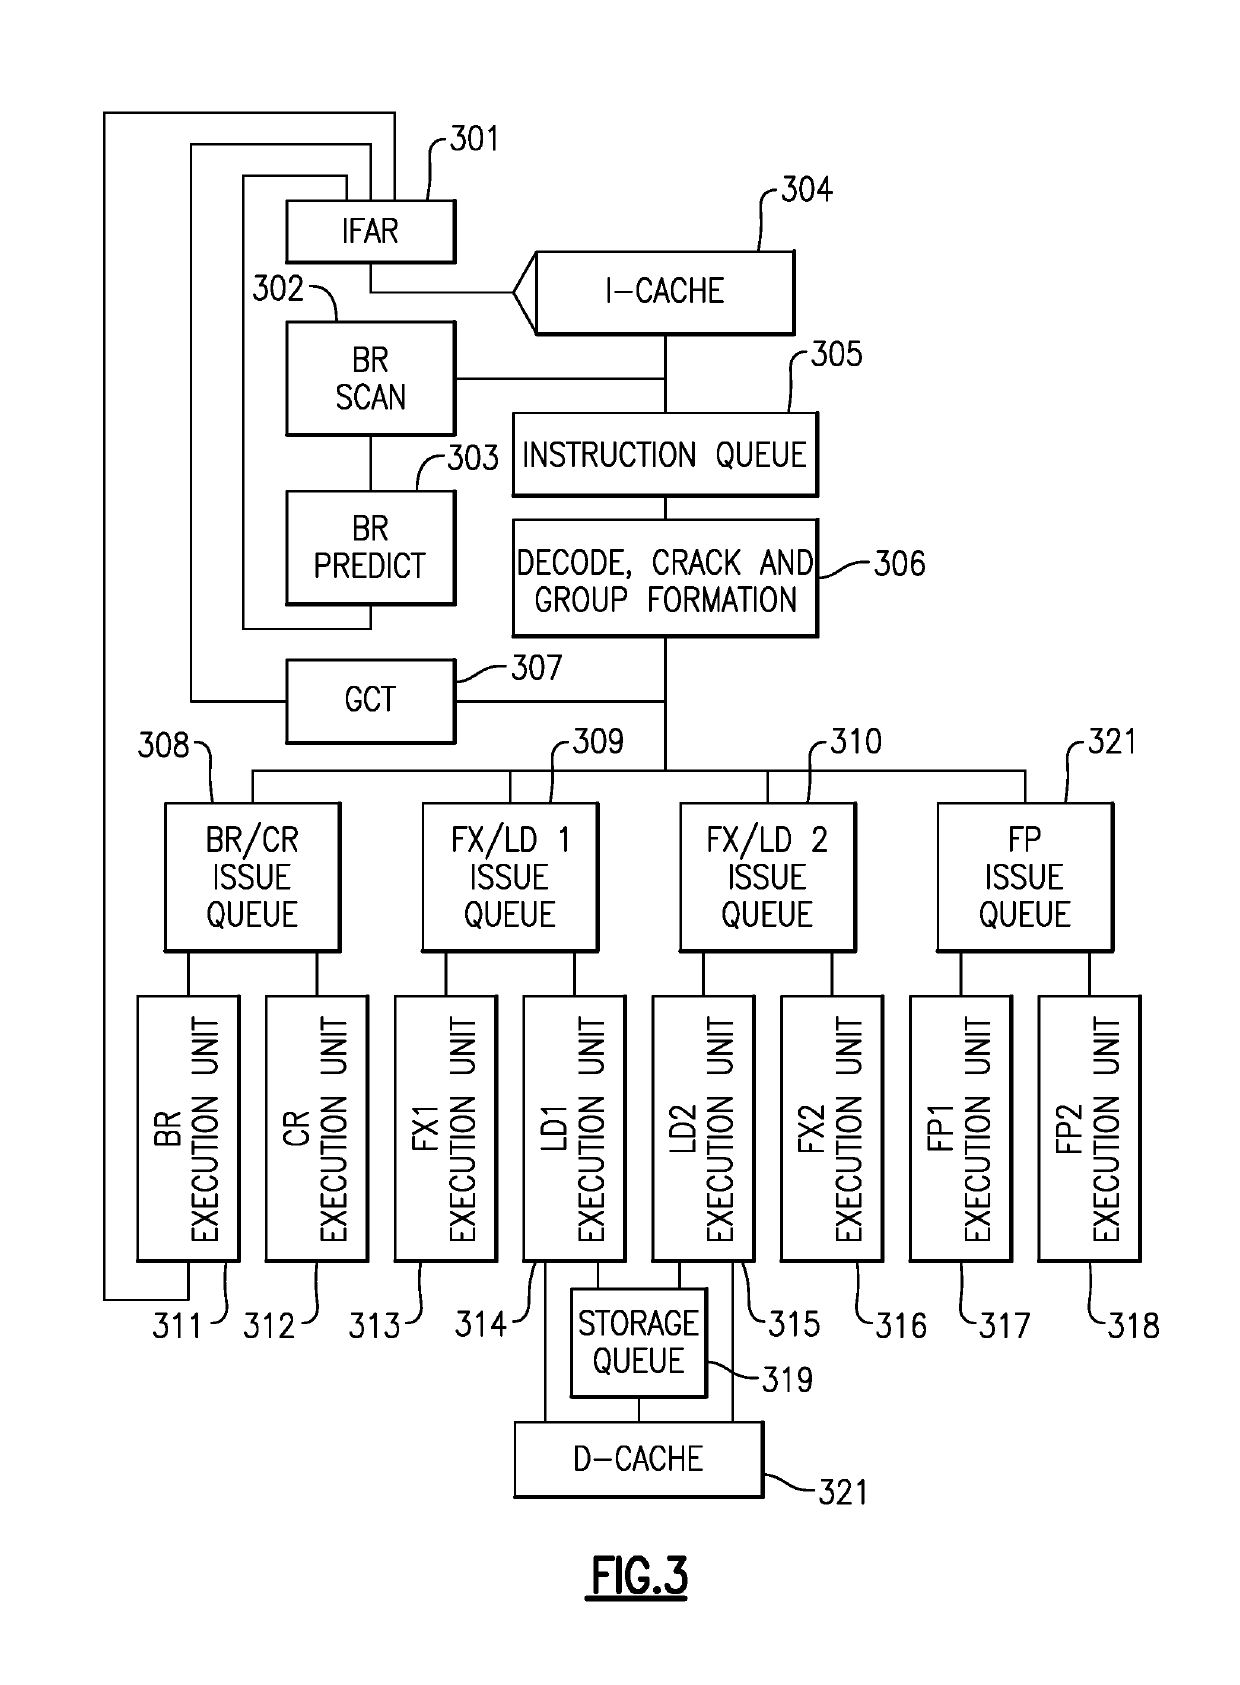 Suppressing branch prediction updates upon repeated execution of an aborted transaction until forward progress is made